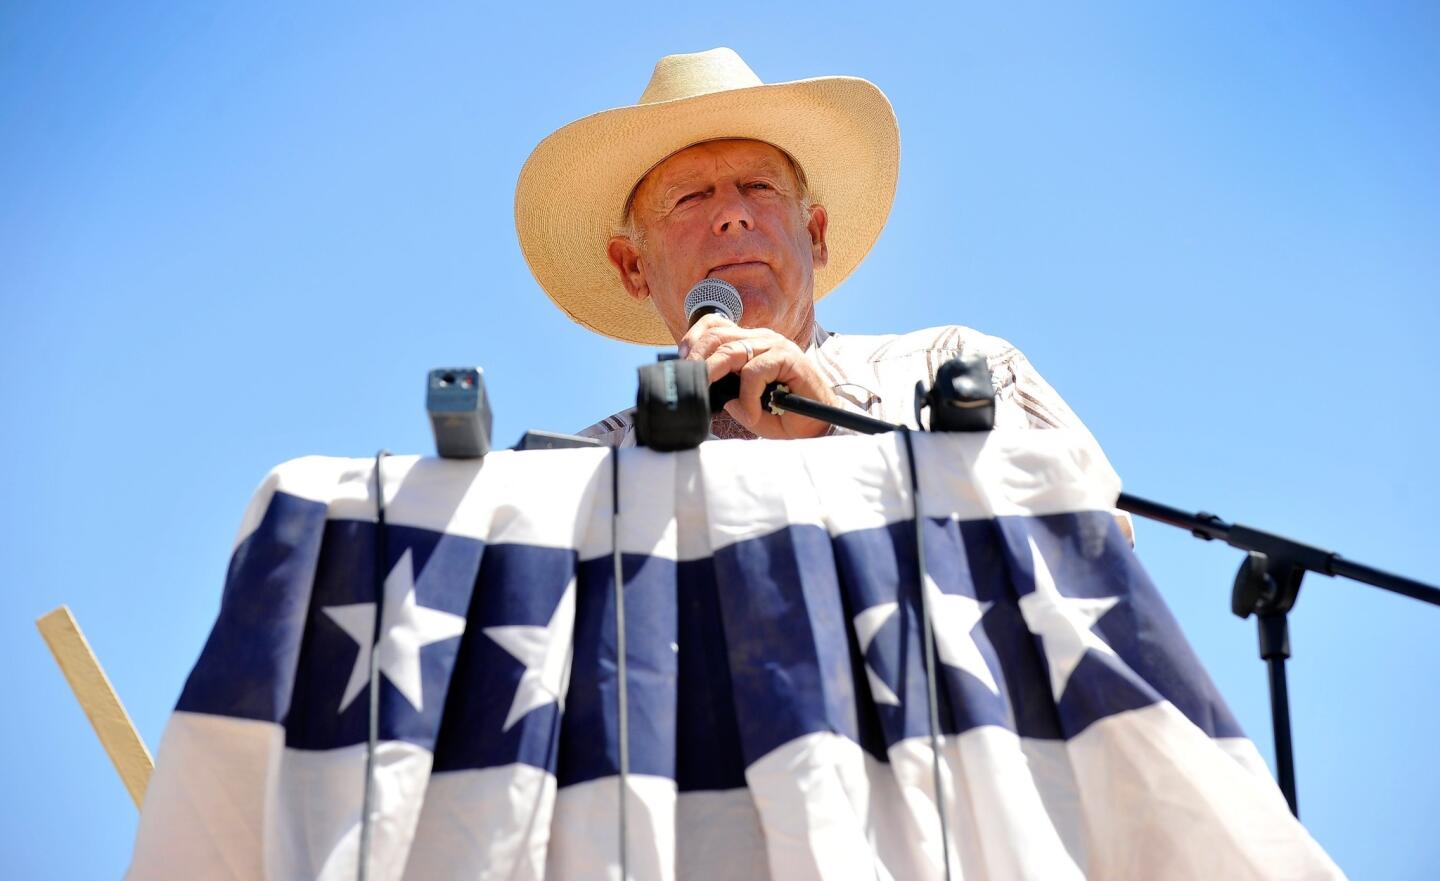 Several Republican lawmakers backpedaled their endorsements of Nevada rancher Cliven Bundy after he said he wondered whether African Americans were "better off as slaves." Sen. Ted Cruz (R-Texas) and Sen. Rand Paul (R-Ky.) were among those to strongly criticize Bundy.